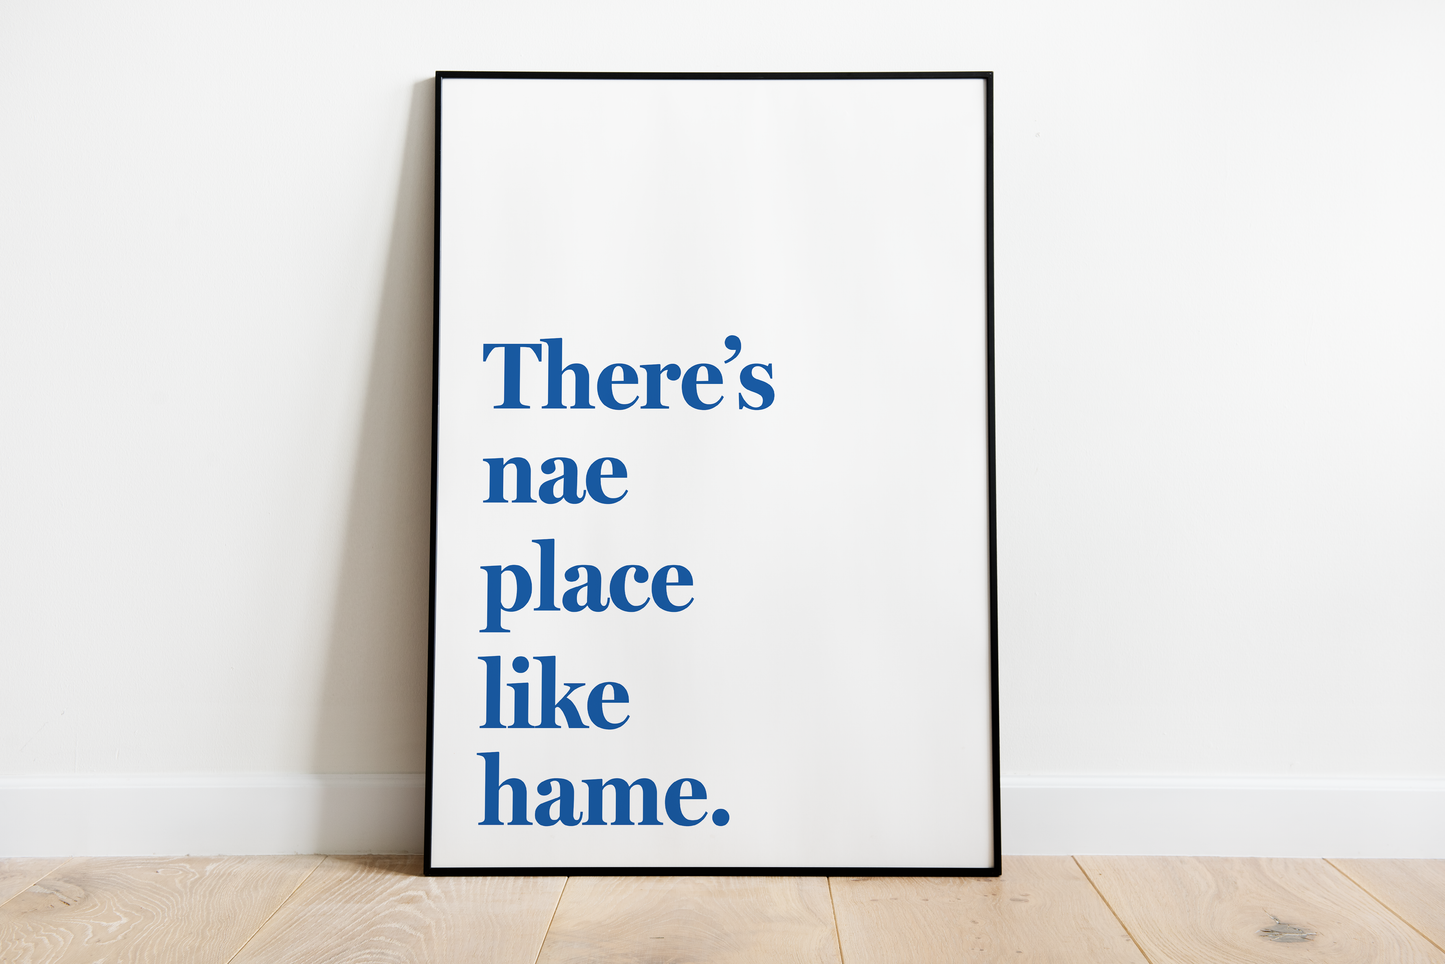 "There's nae place like hame" (Colourful)